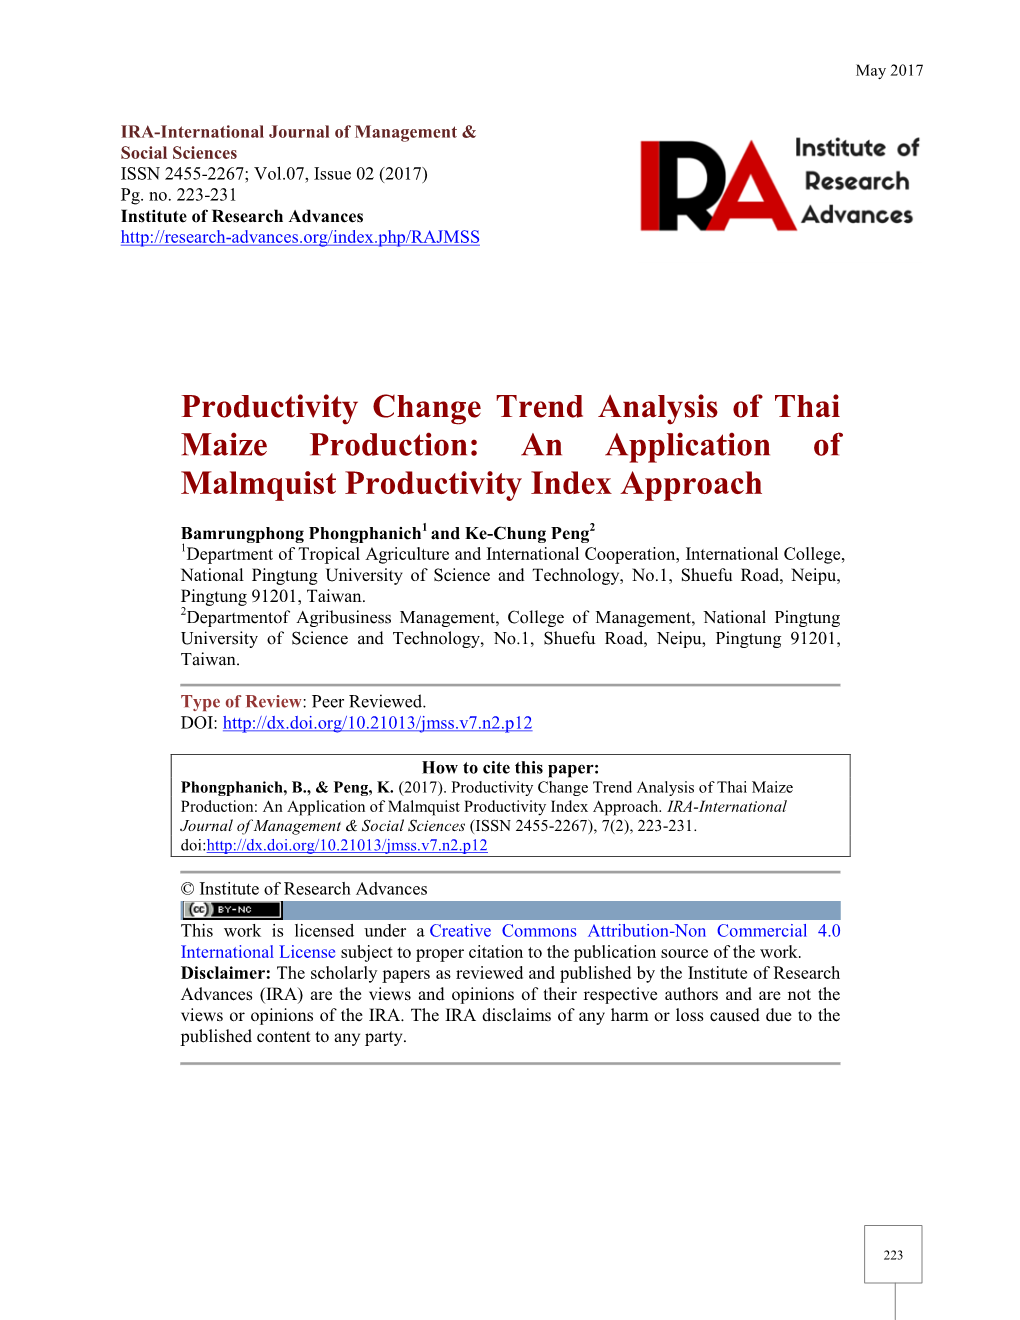 Productivity Change Trend Analysis of Thai Maize Production: an Application of Malmquist Productivity Index Approach